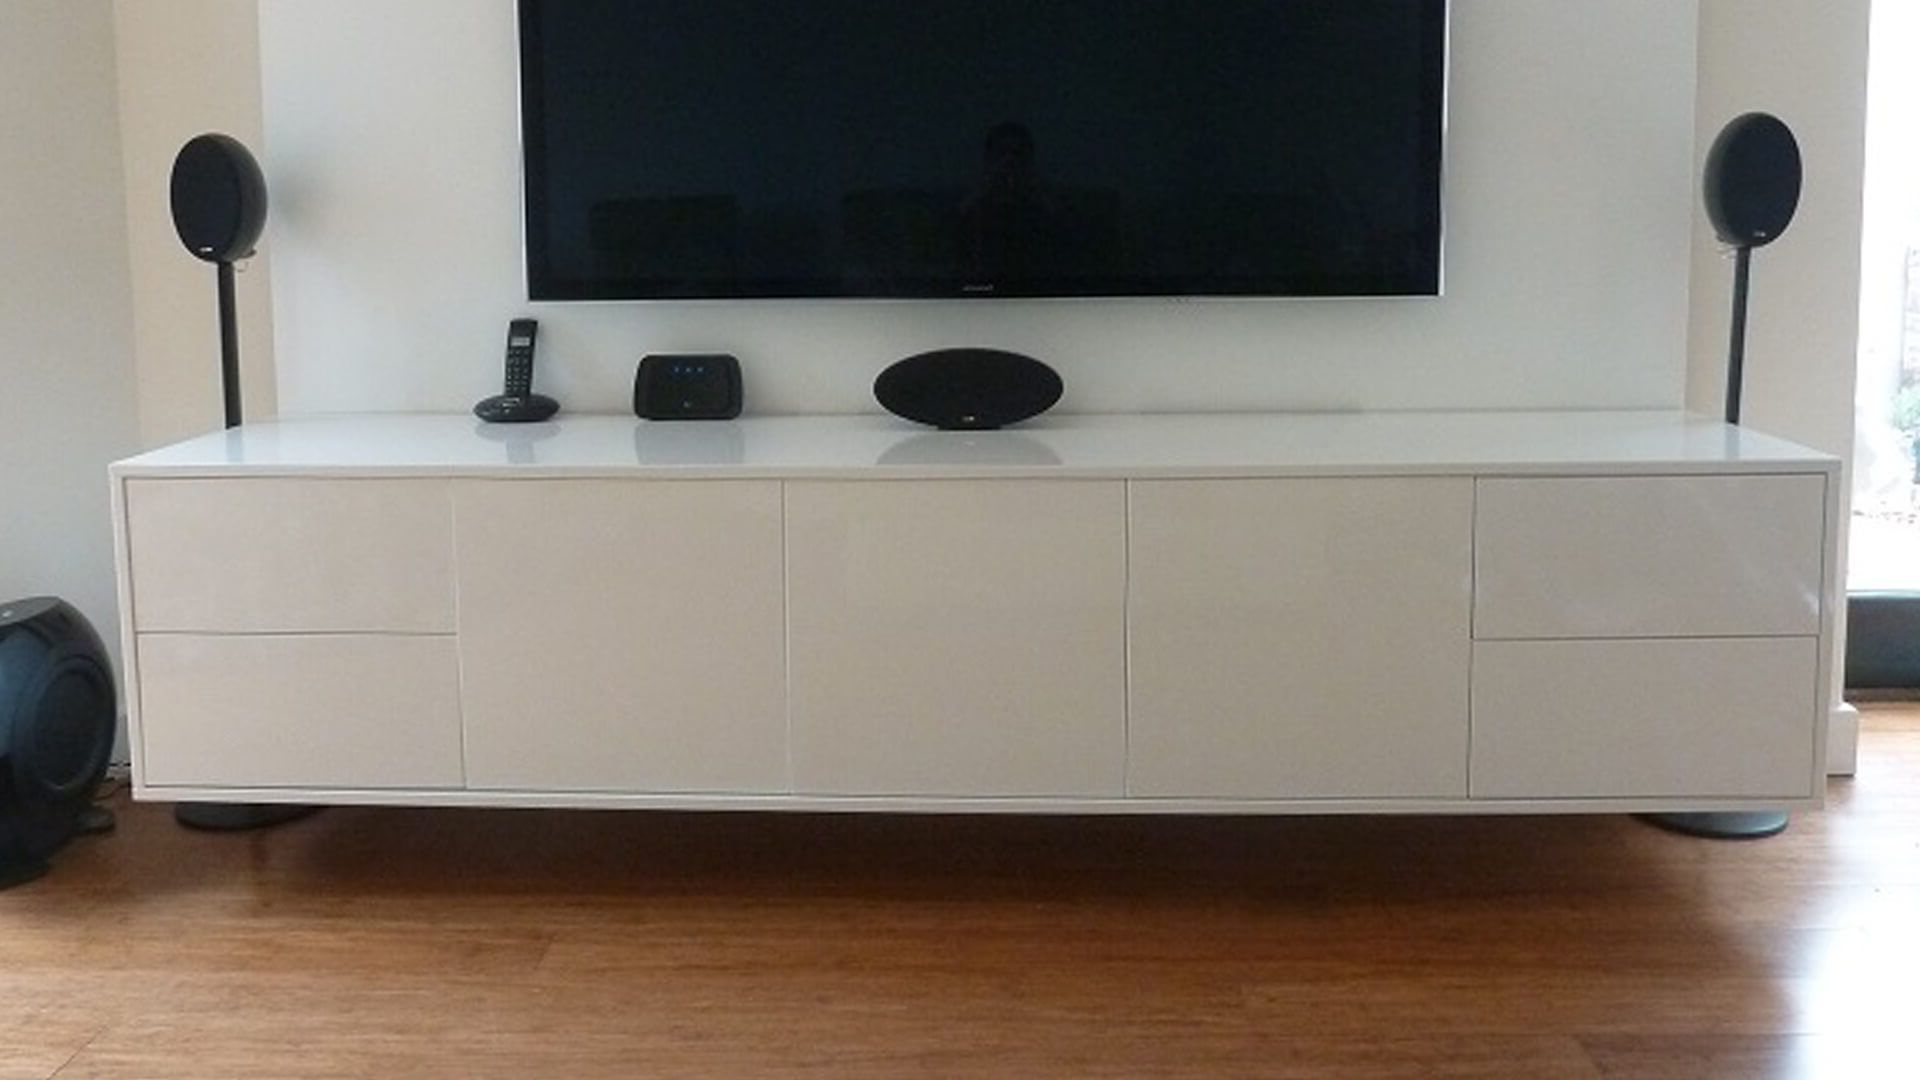 Most Current White Wall Mounted Tv Stands Pertaining To Wall Mounted Contemporary White Gloss Tv Unit (View 4 of 20)